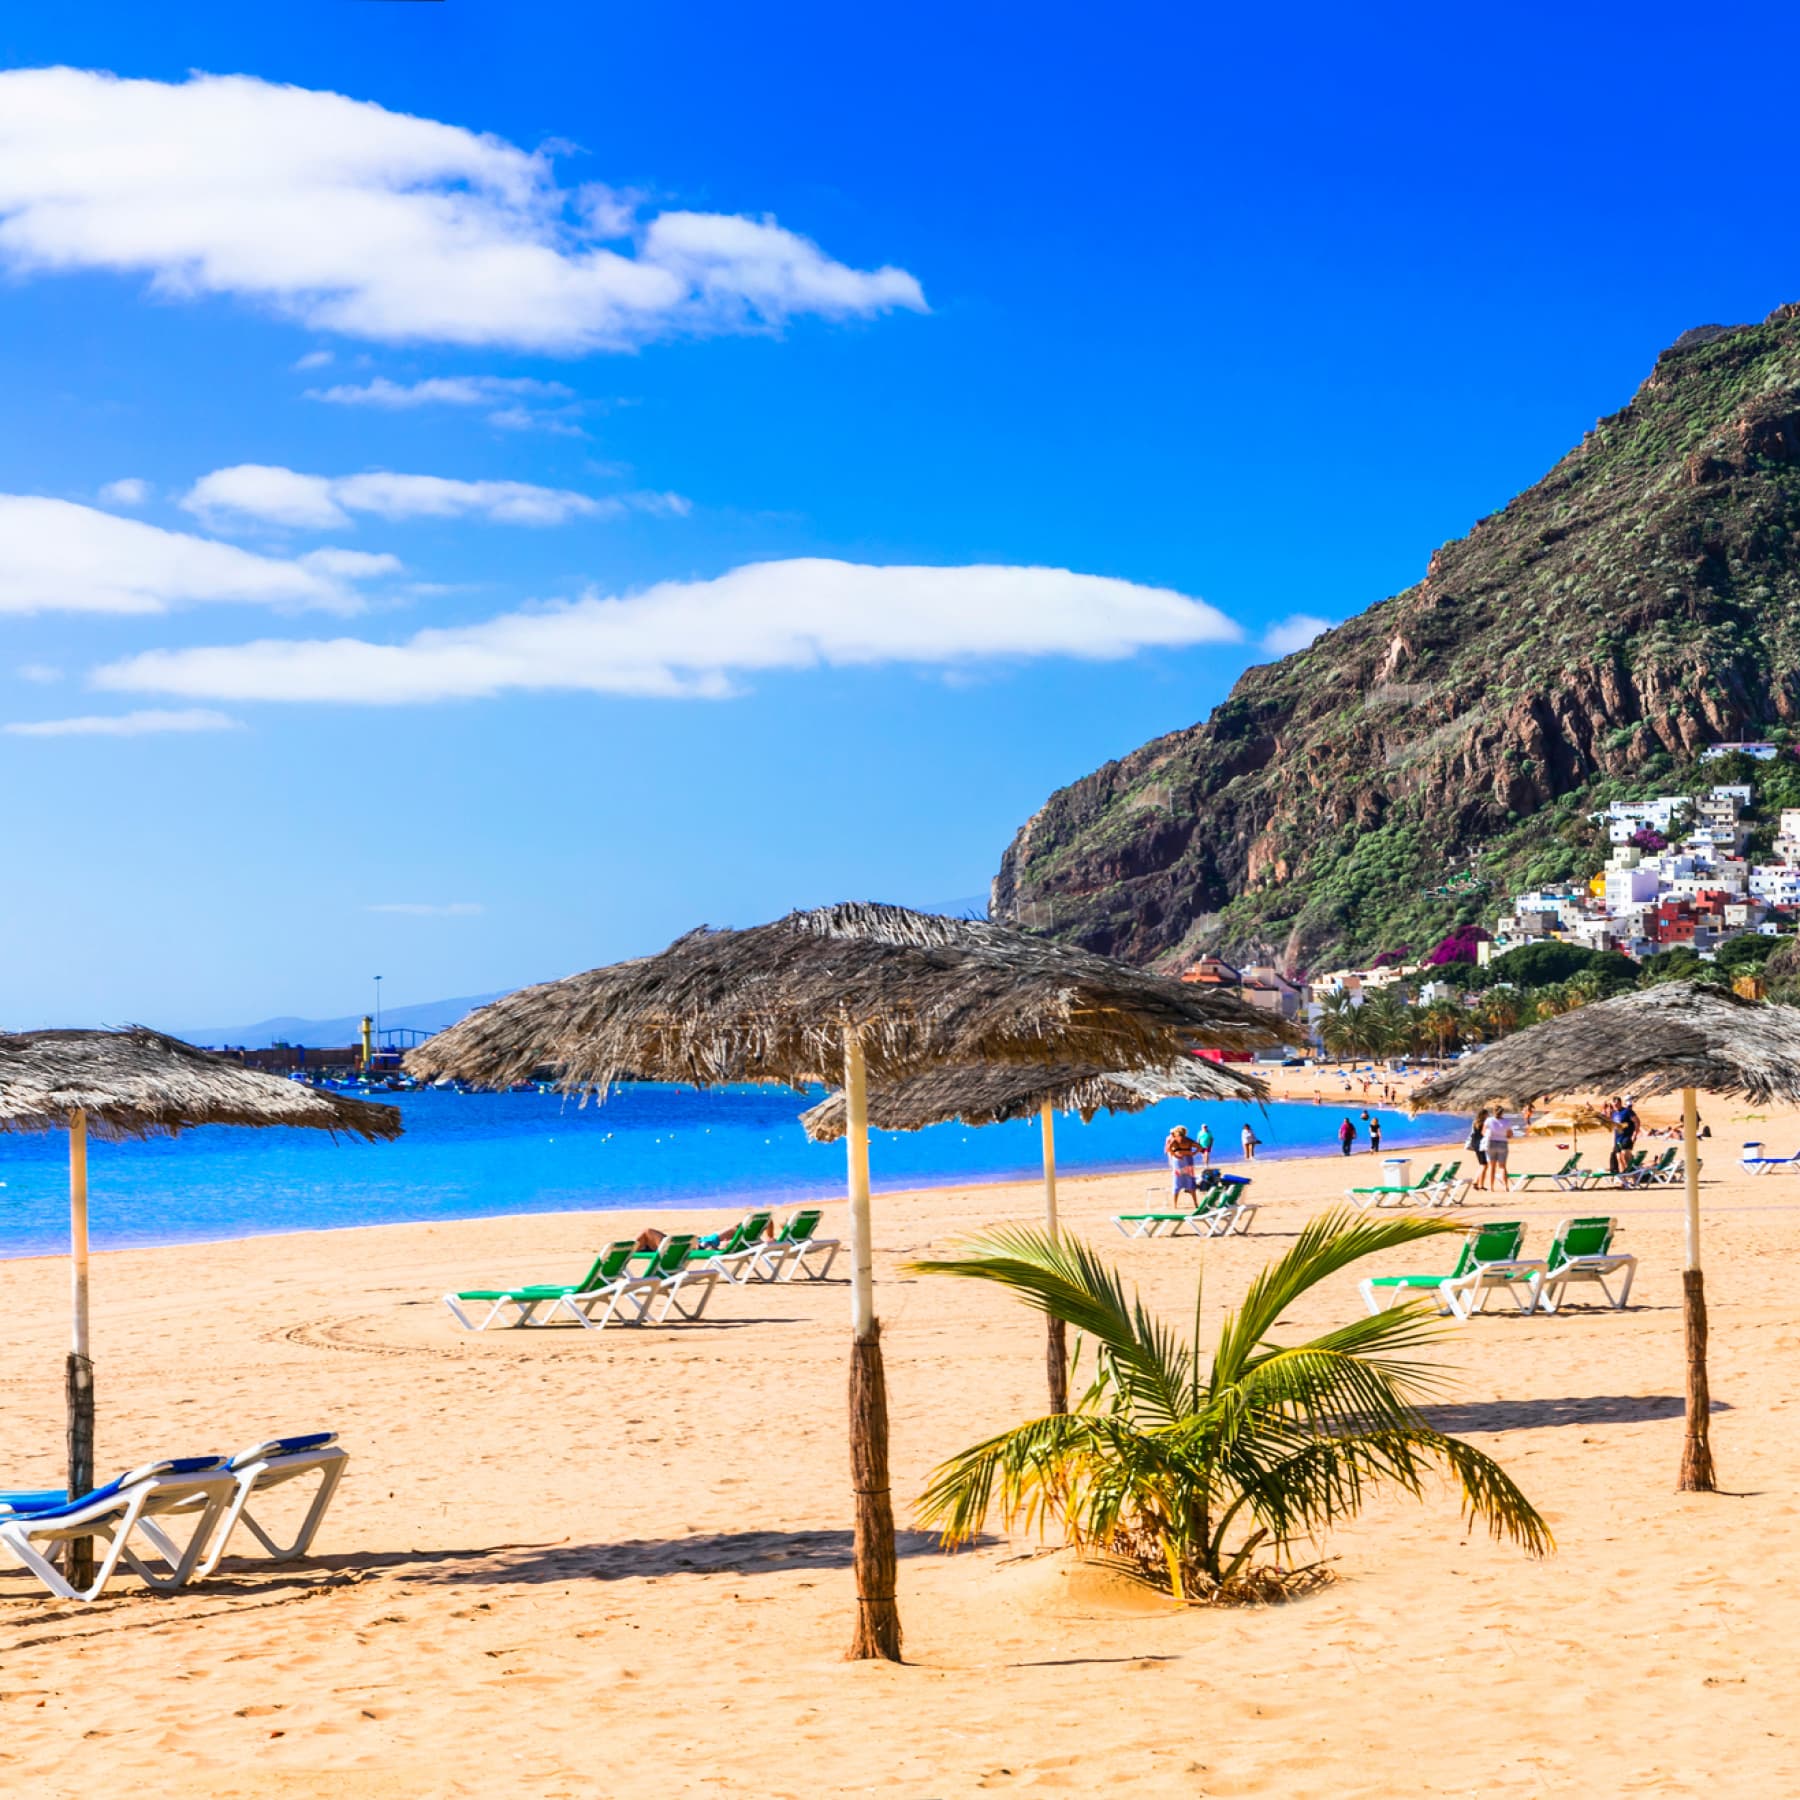 Golden beaches with mountainous backgrounds in Tenerife